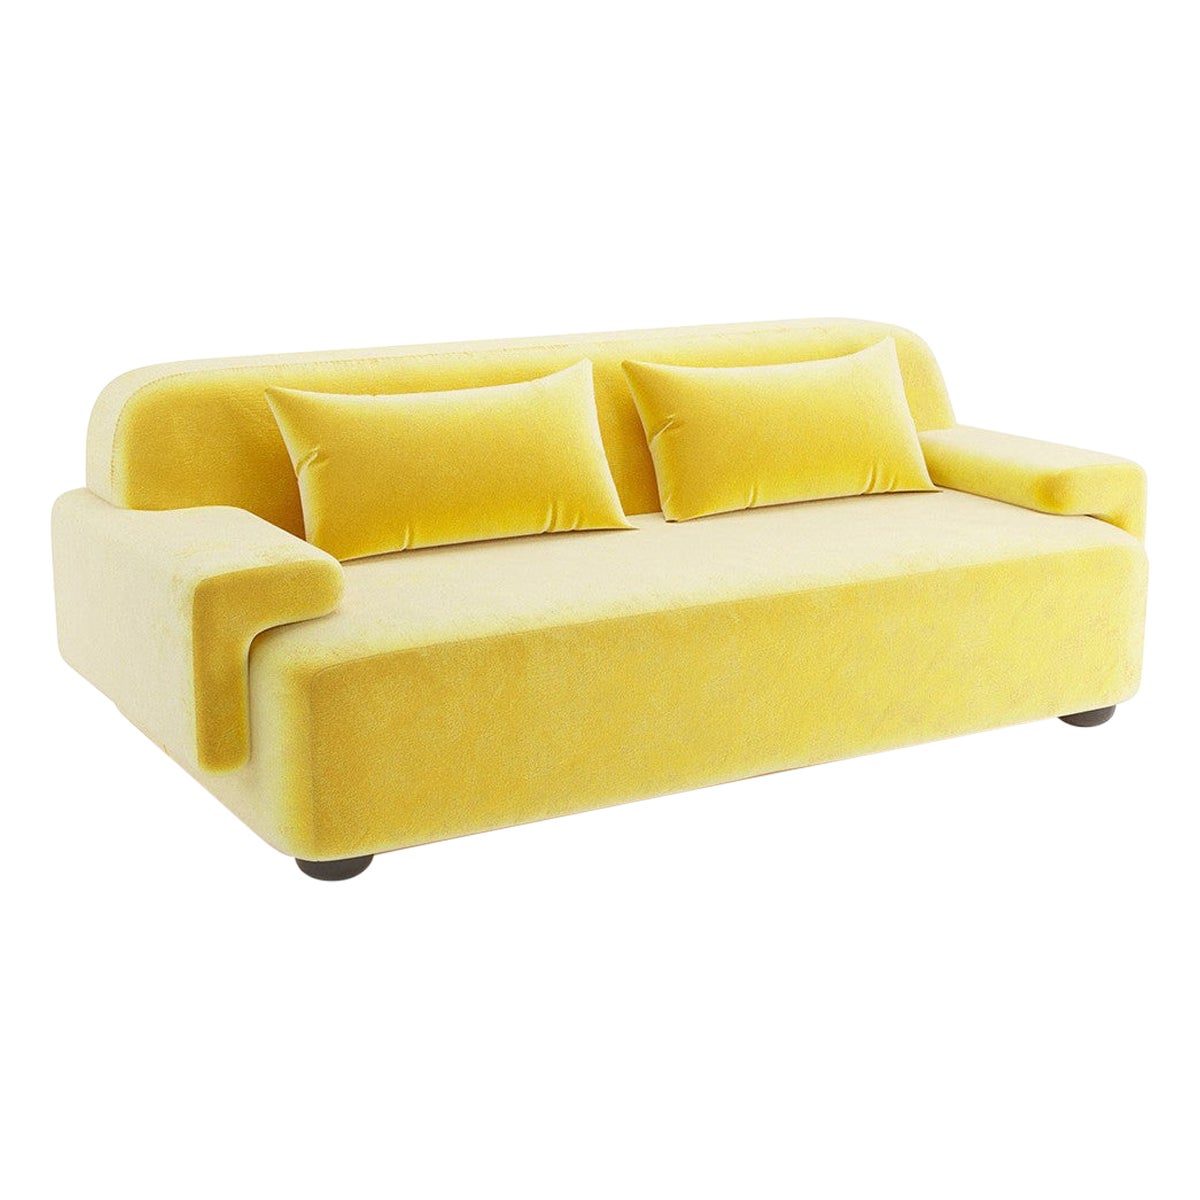 Popus Editions Lena 2.5 Seater Sofa in Yellow Como Velvet Upholstery For Sale